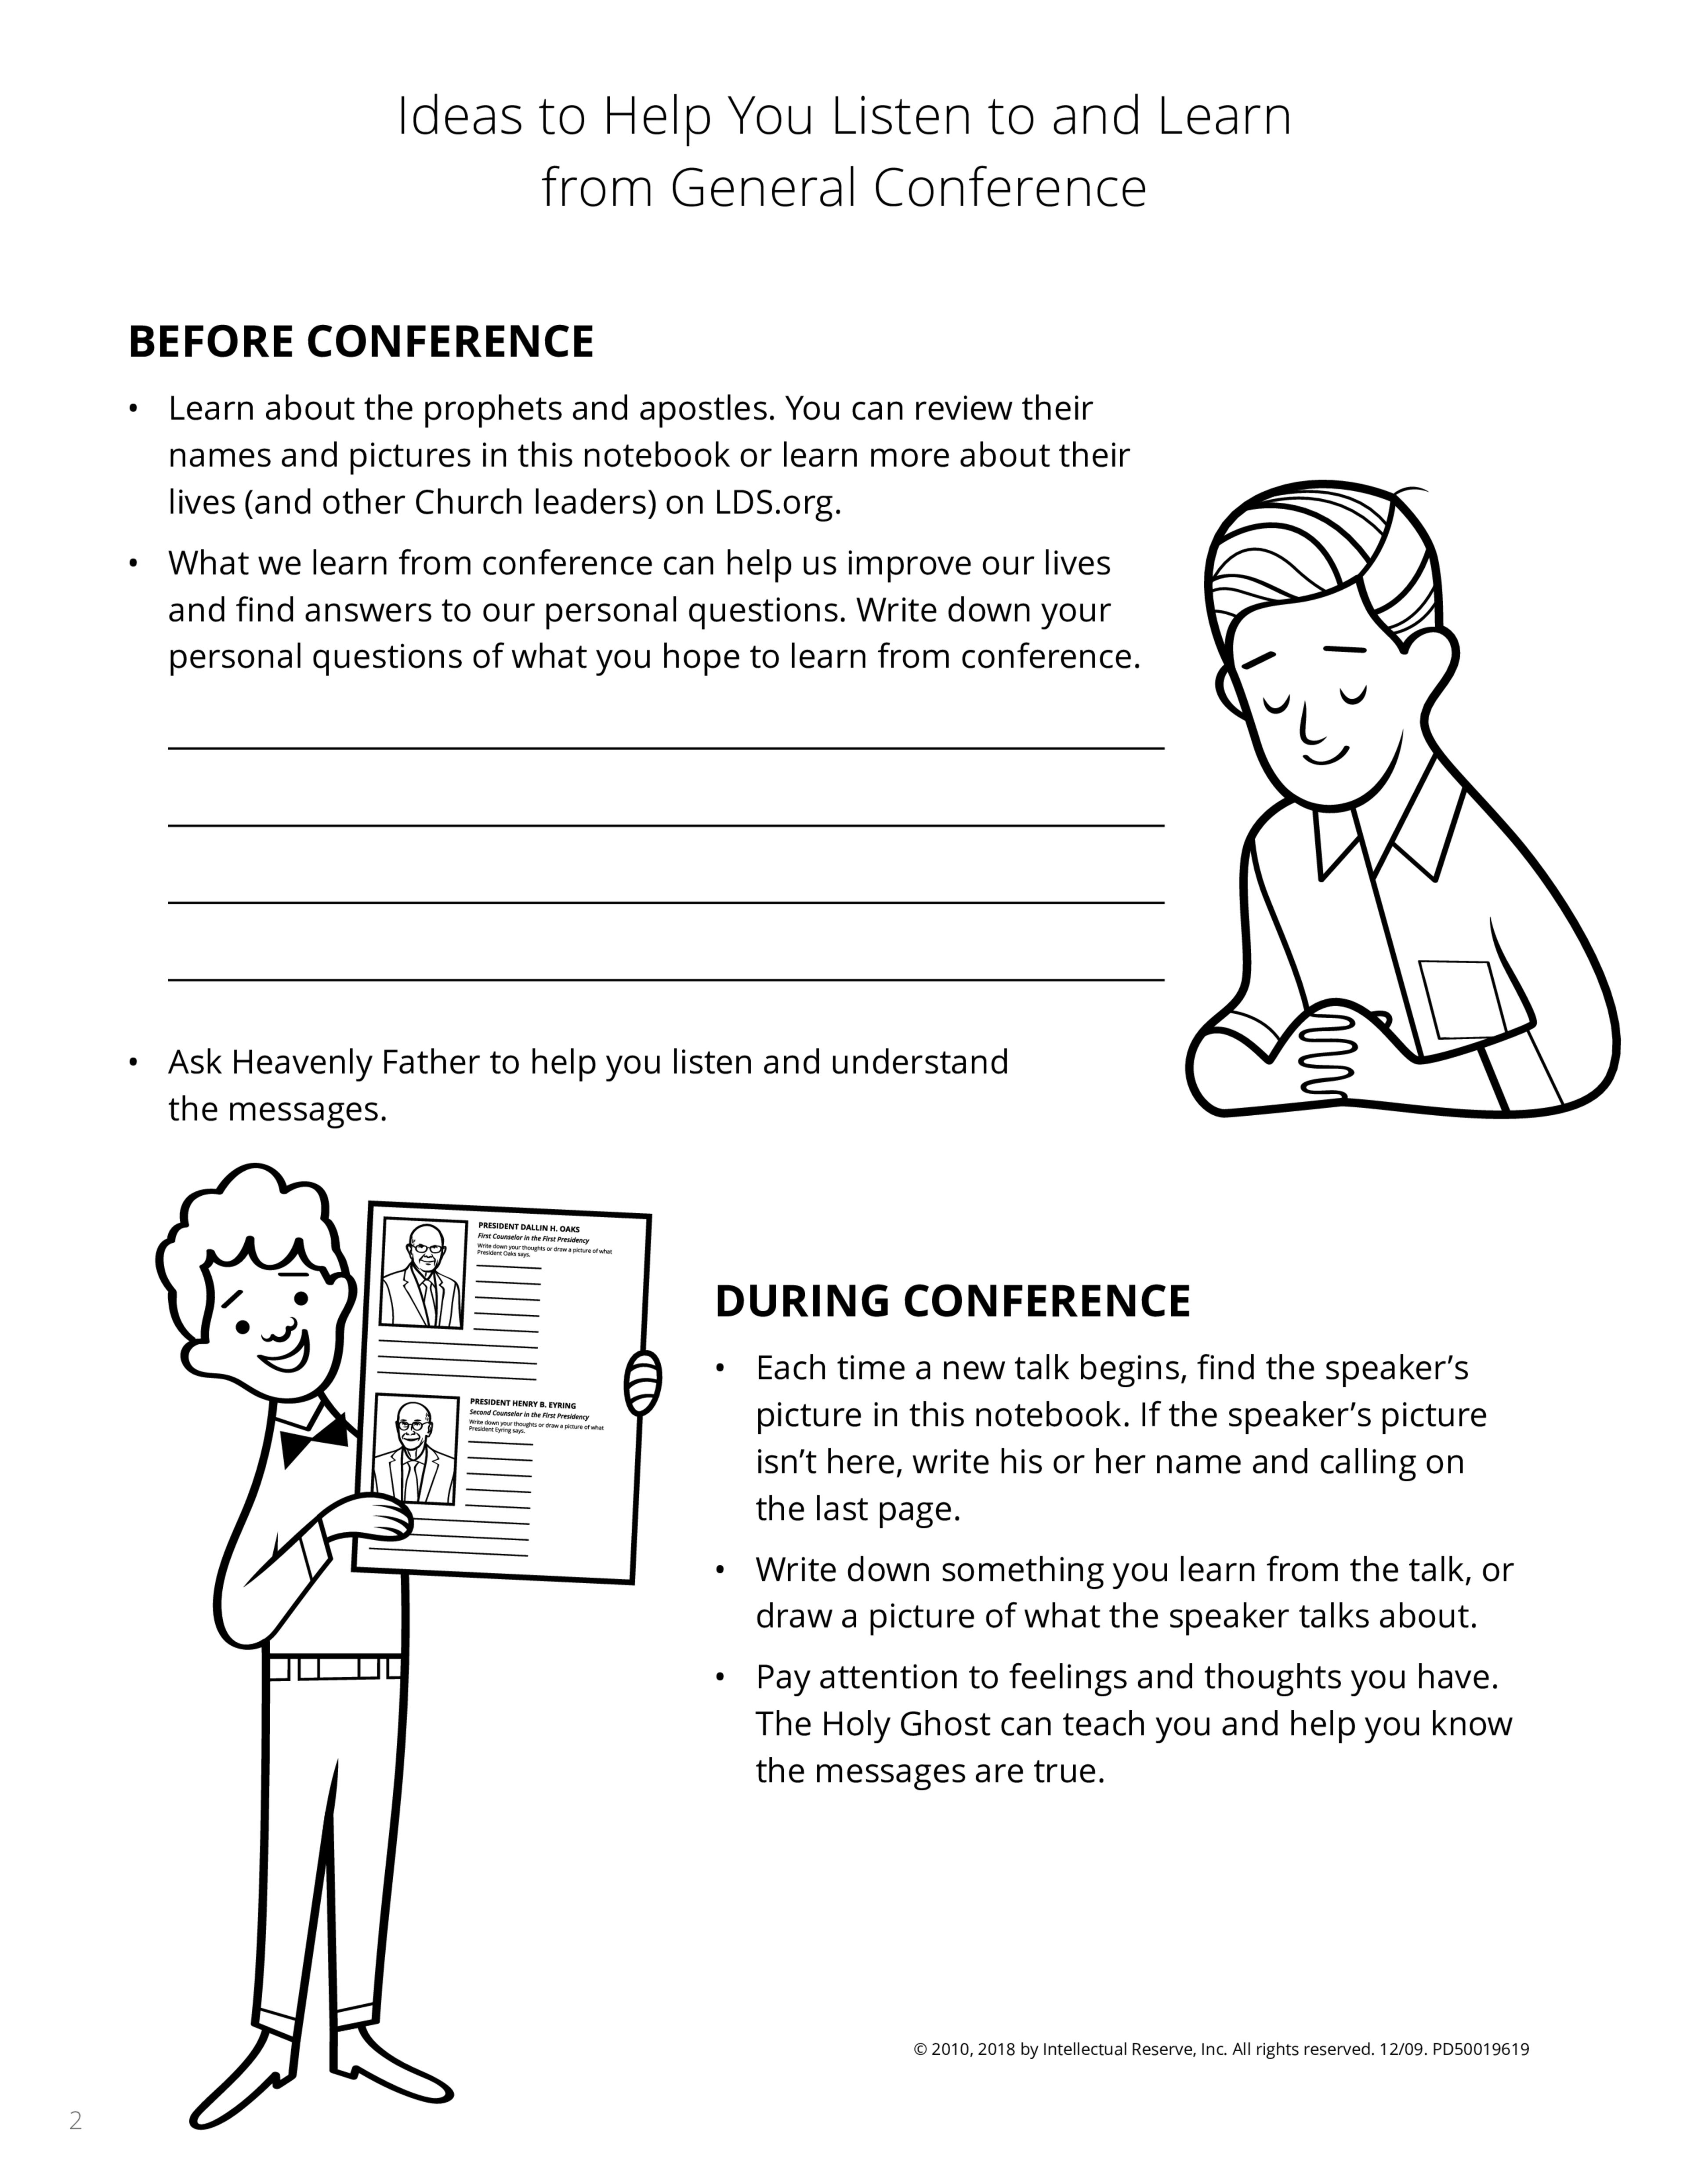 An activity page to encourage children to listen and engage before and during general conference.